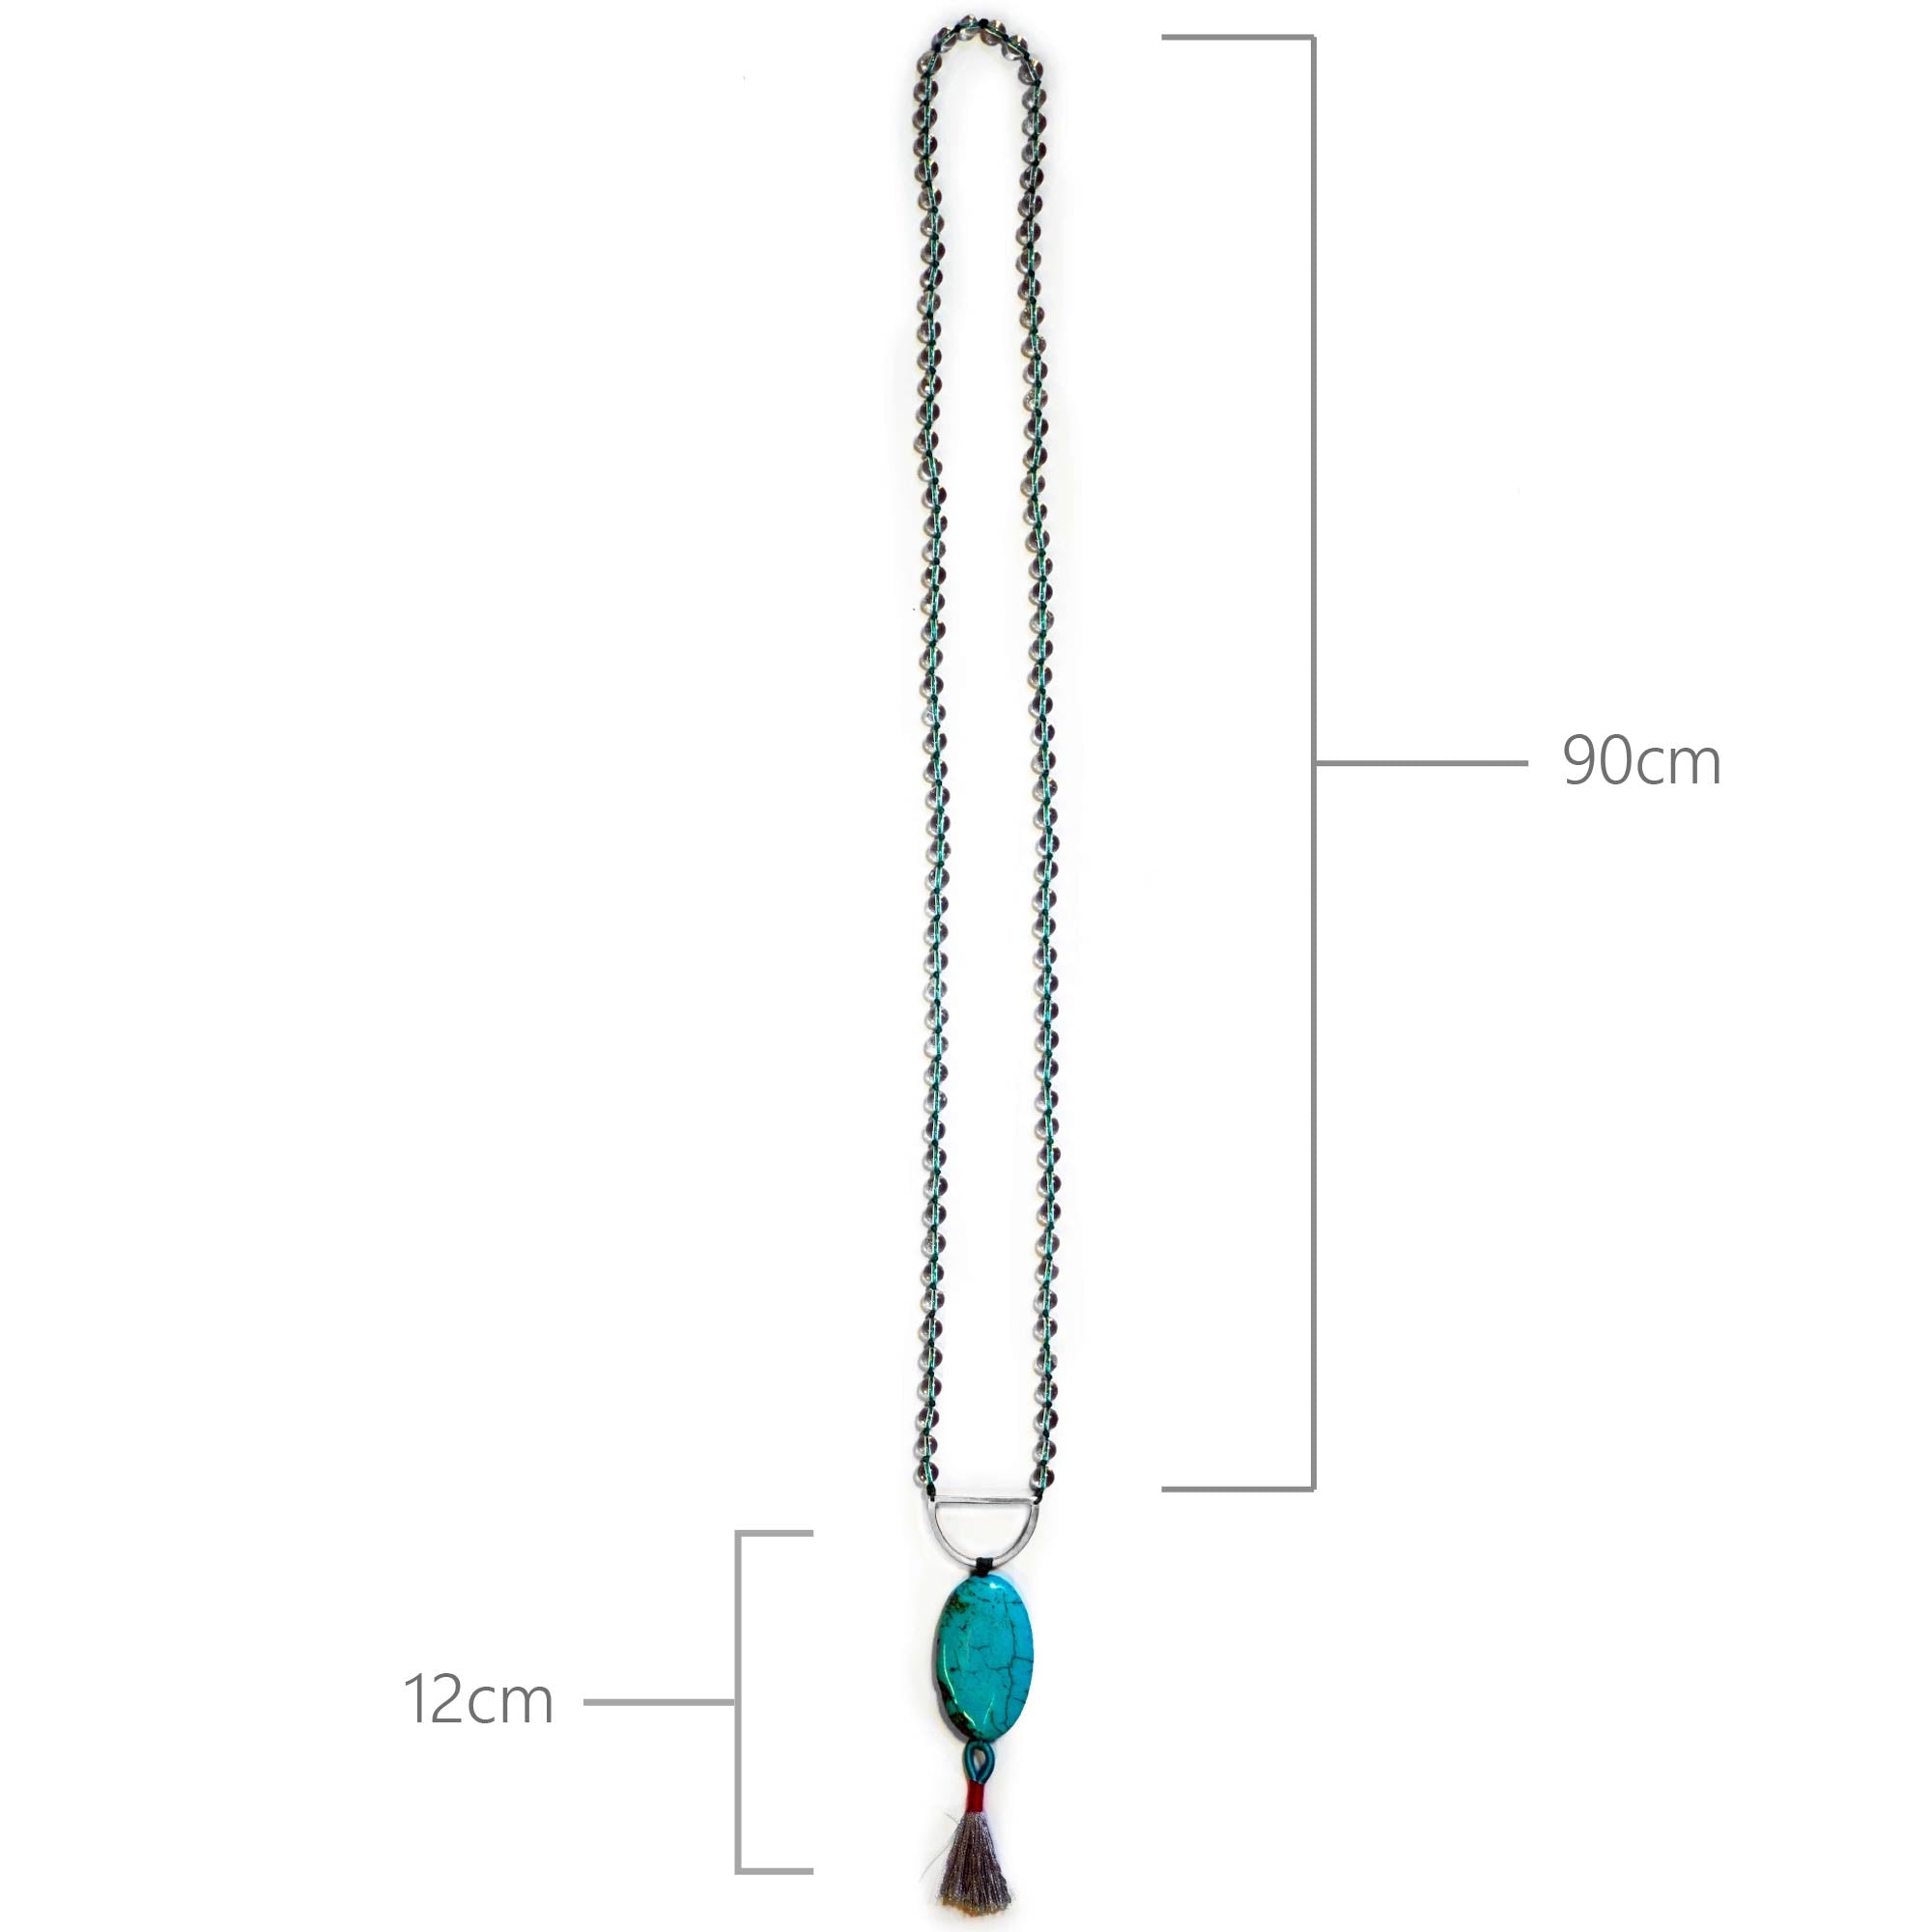 Calm Thoughts Mala Necklace